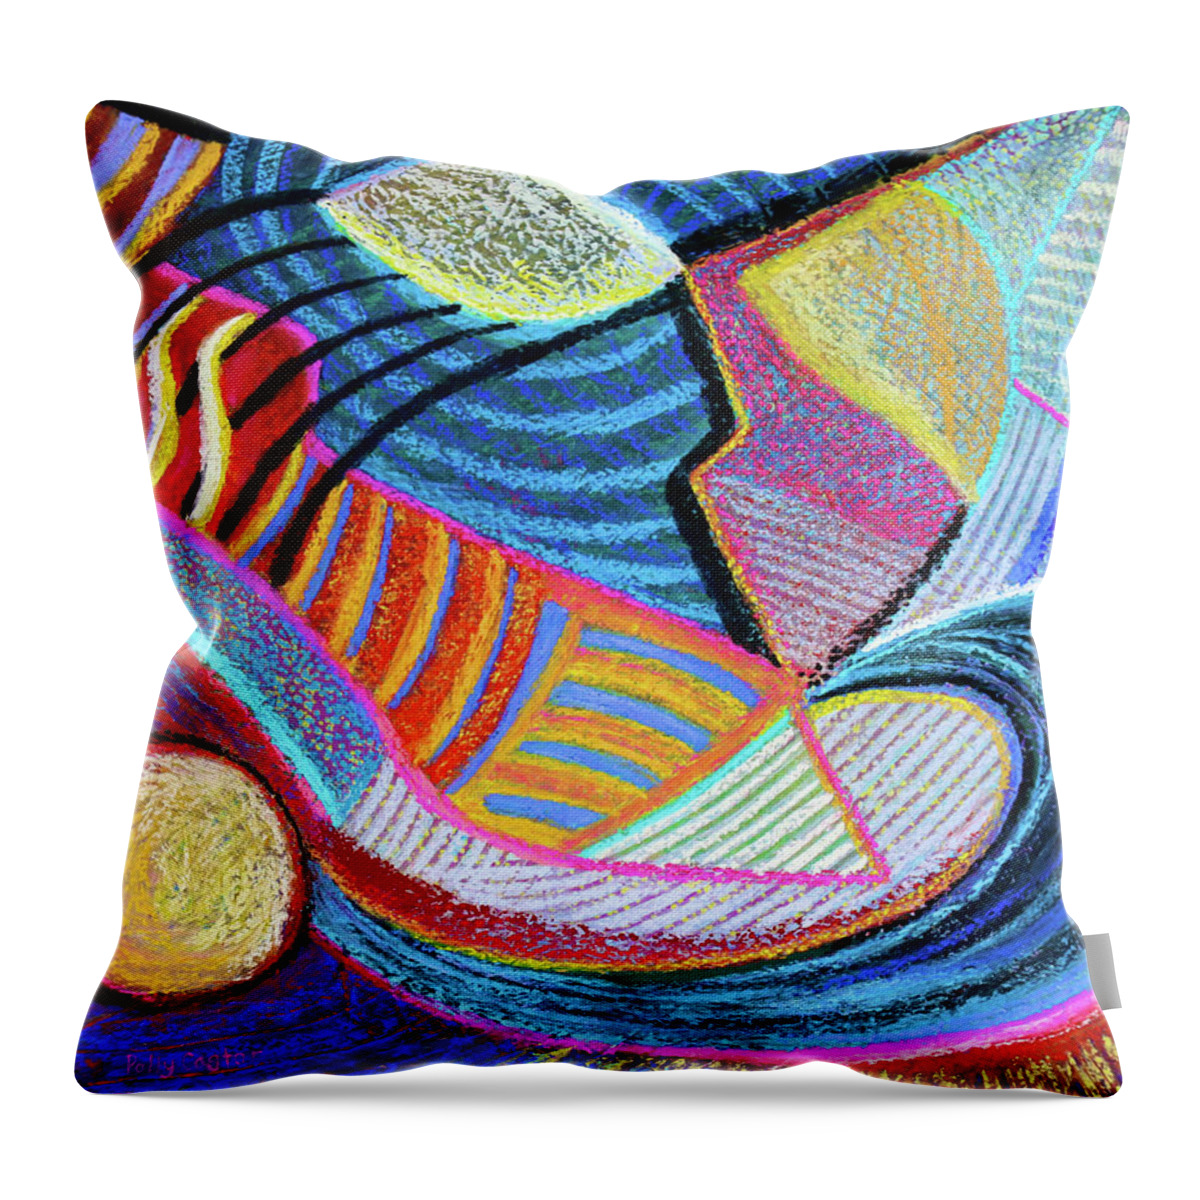  Throw Pillow featuring the painting Live in the Present by Polly Castor